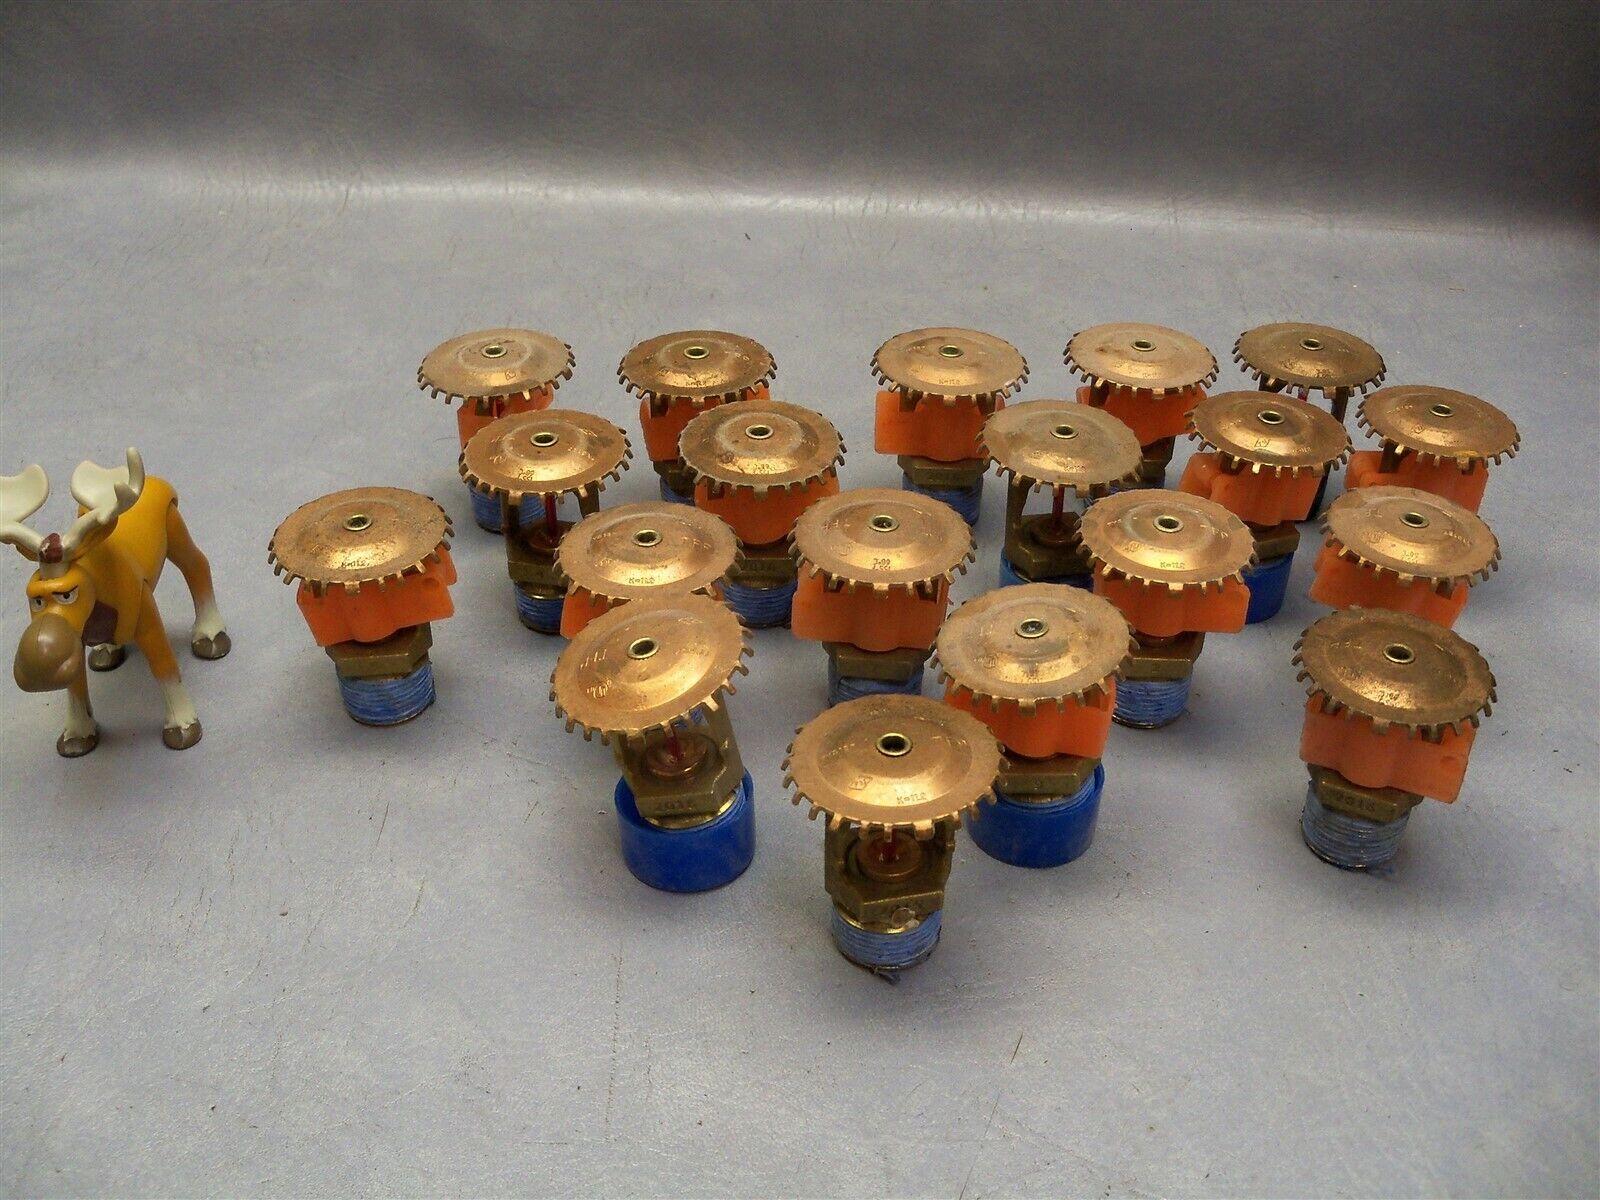 Upright Brass Surprise price Sprinkler Ultra-Cheap Deals Head 155F Tyco Lot of 19 4